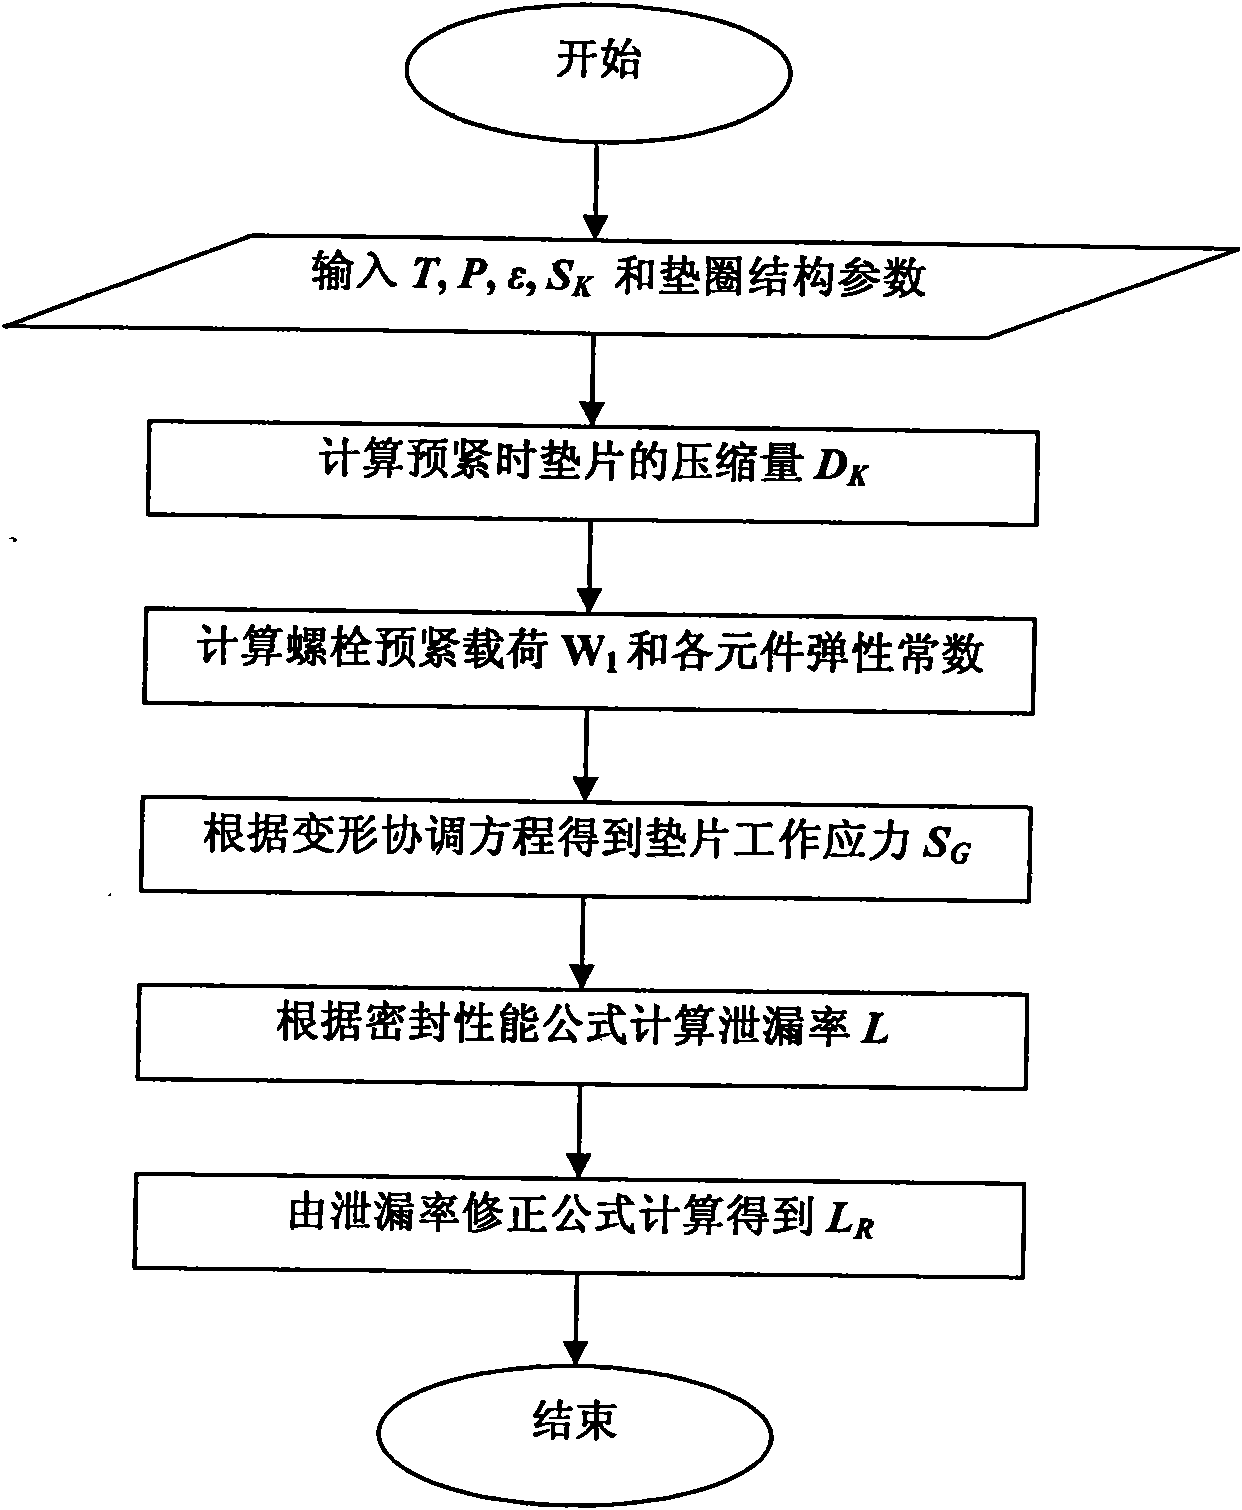 Predicting method of leakage rate of bolted flange connection structure with anti-loosing washer